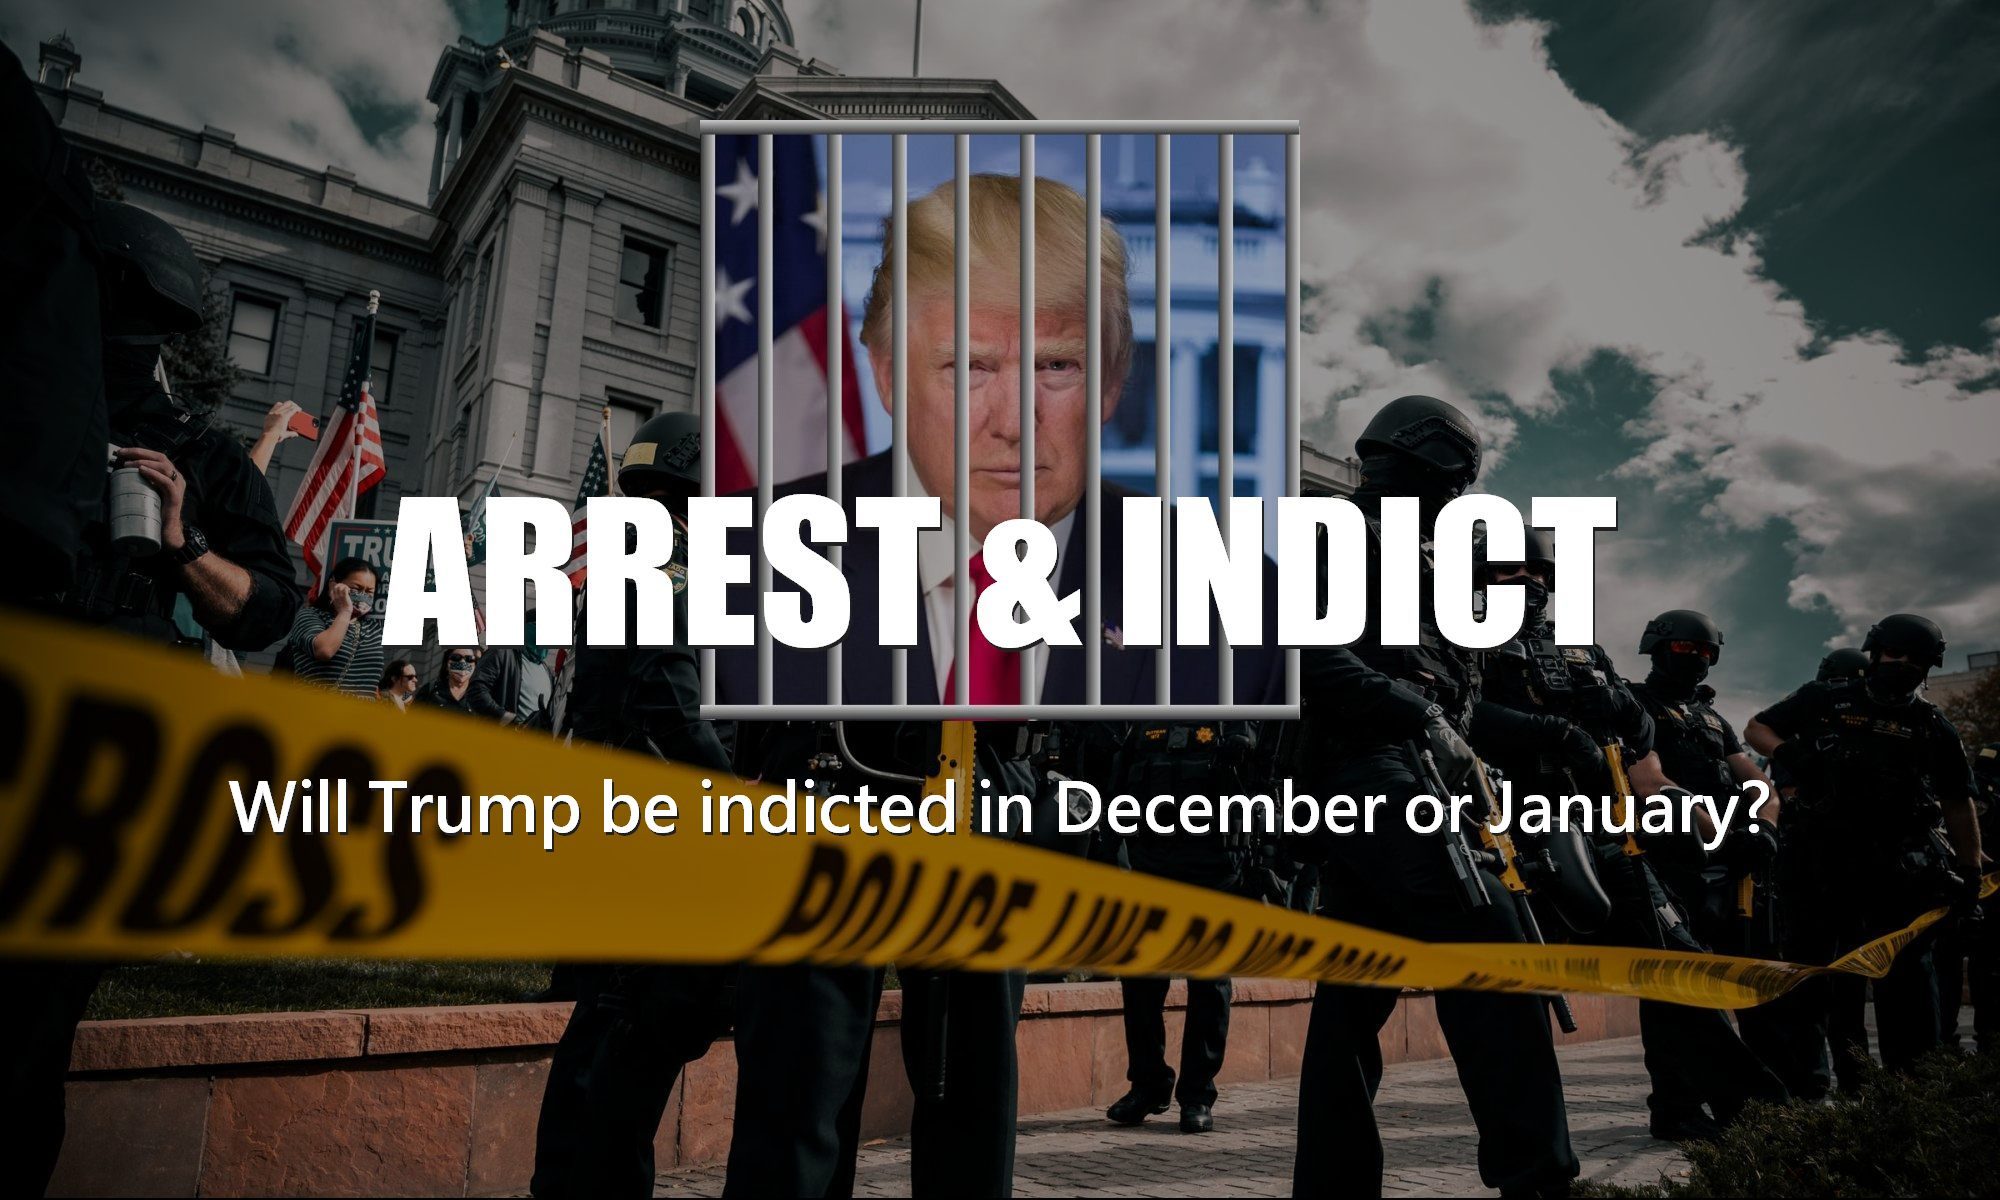 Will Trump be indicted in December or January? Trump arrested news — Mar-a-Lago arrest this month and year